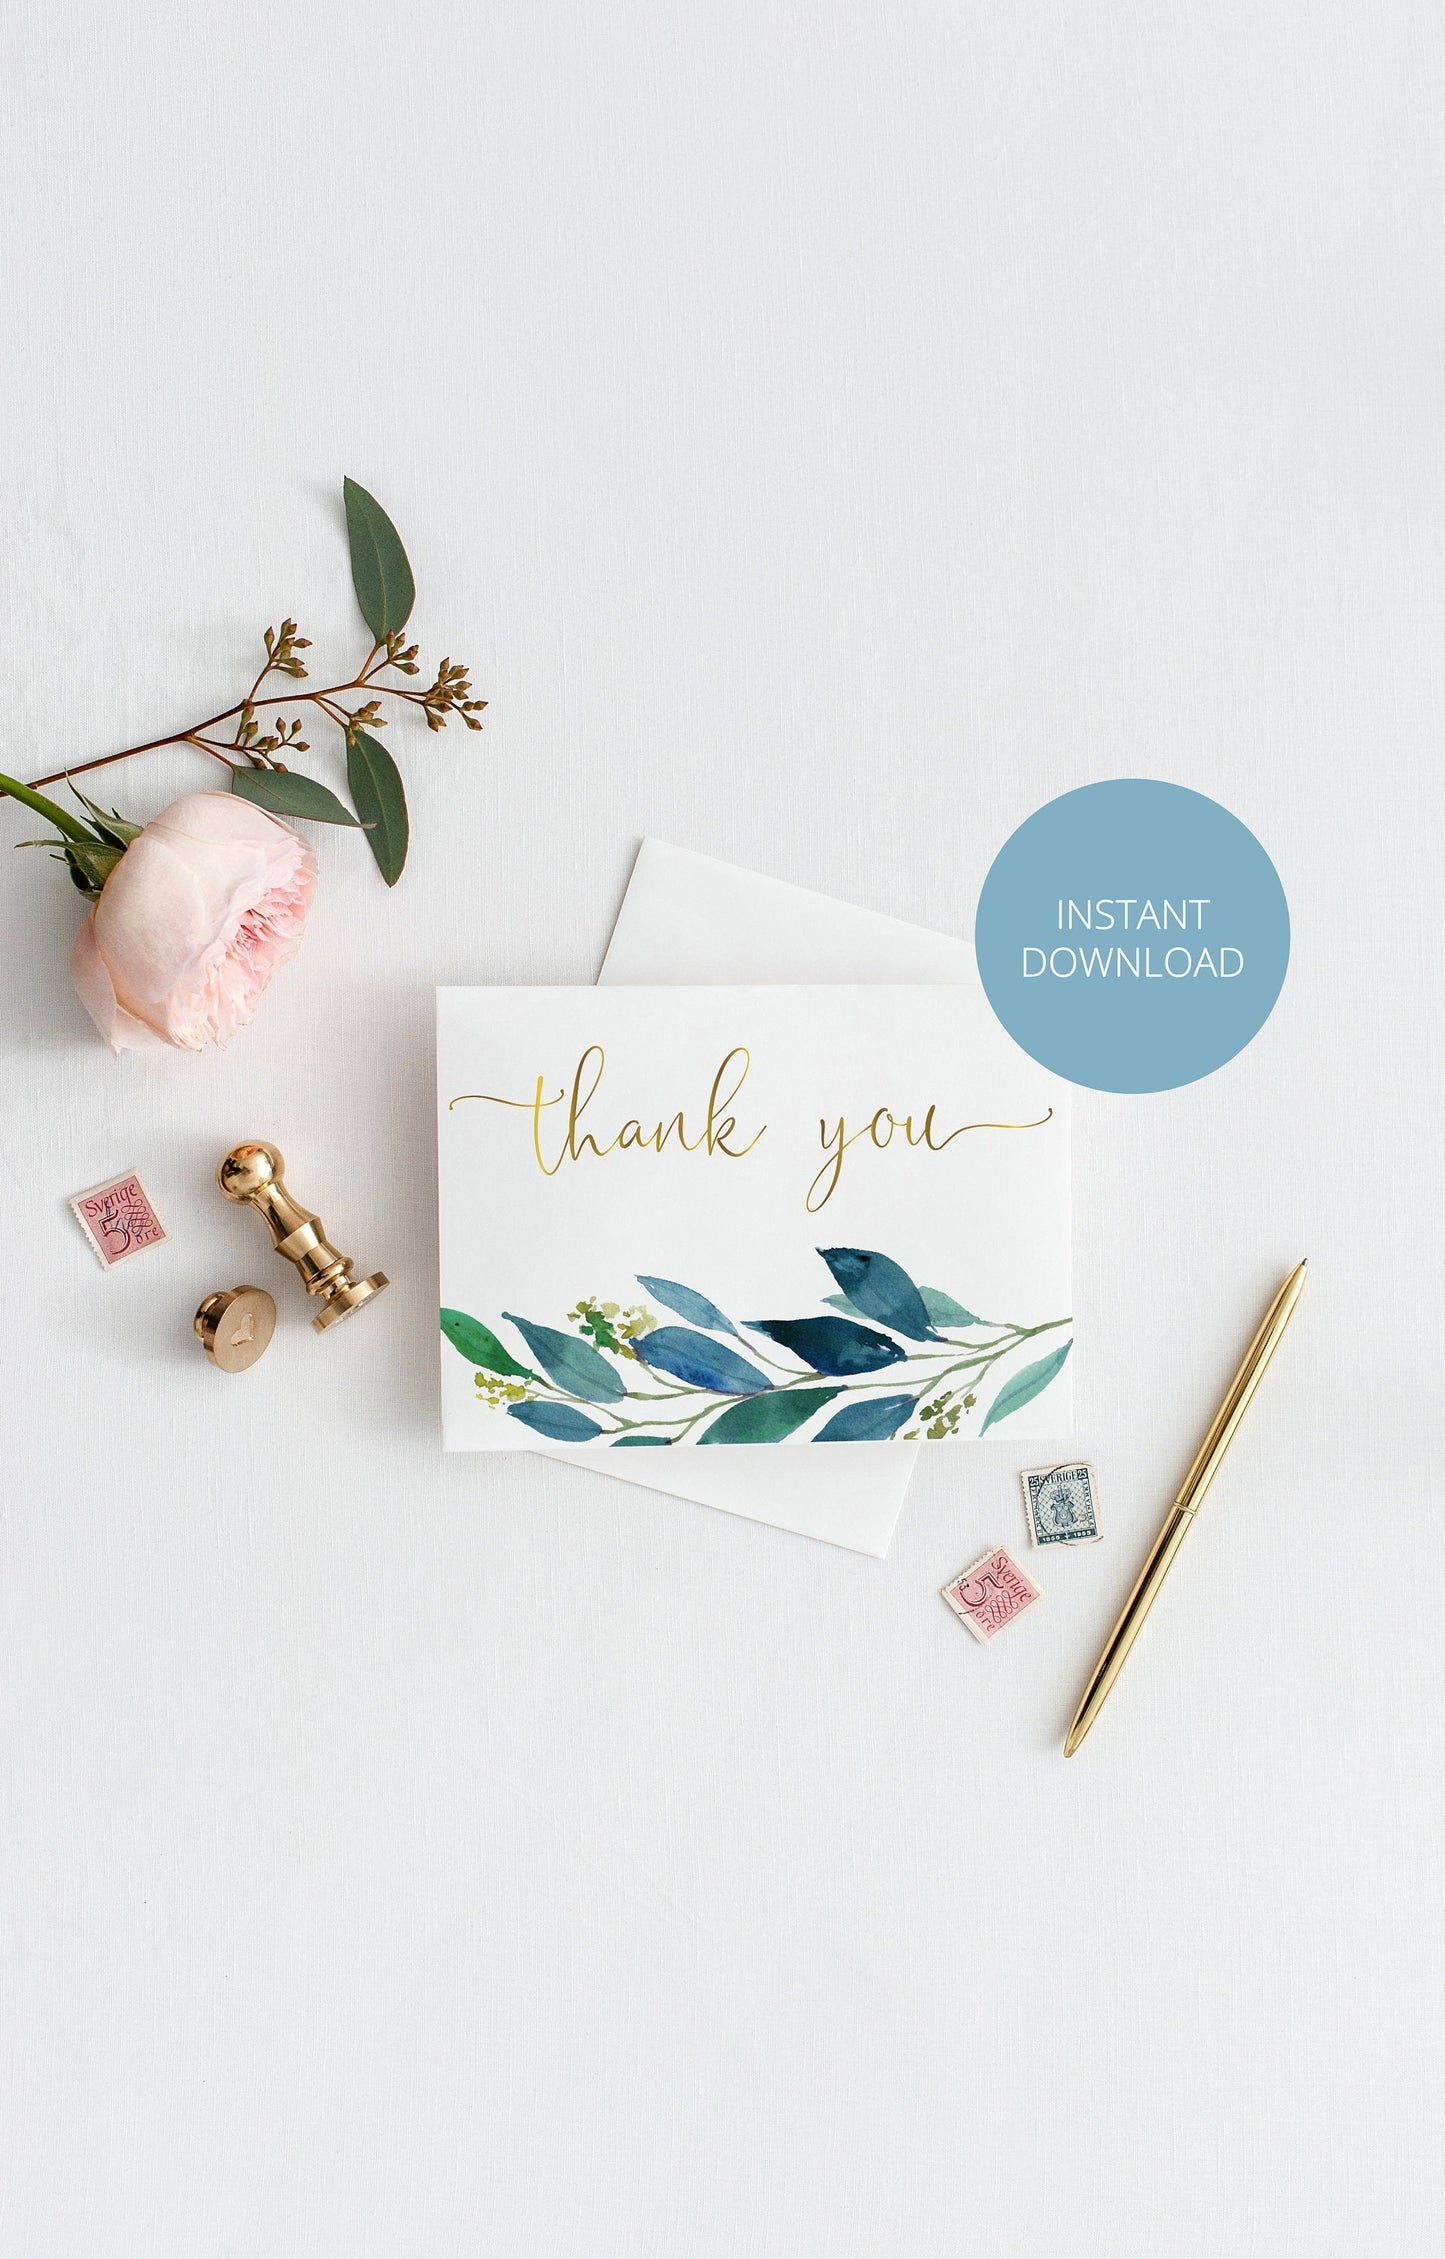 Wedding Thank You Card, Instant Download, Thank you Cards, Printable Thank You, Wedding Cards, Greenery, Dusty Blue, Gold - Elaine TAGS | TY | INSERTS SAVVY PAPER CO